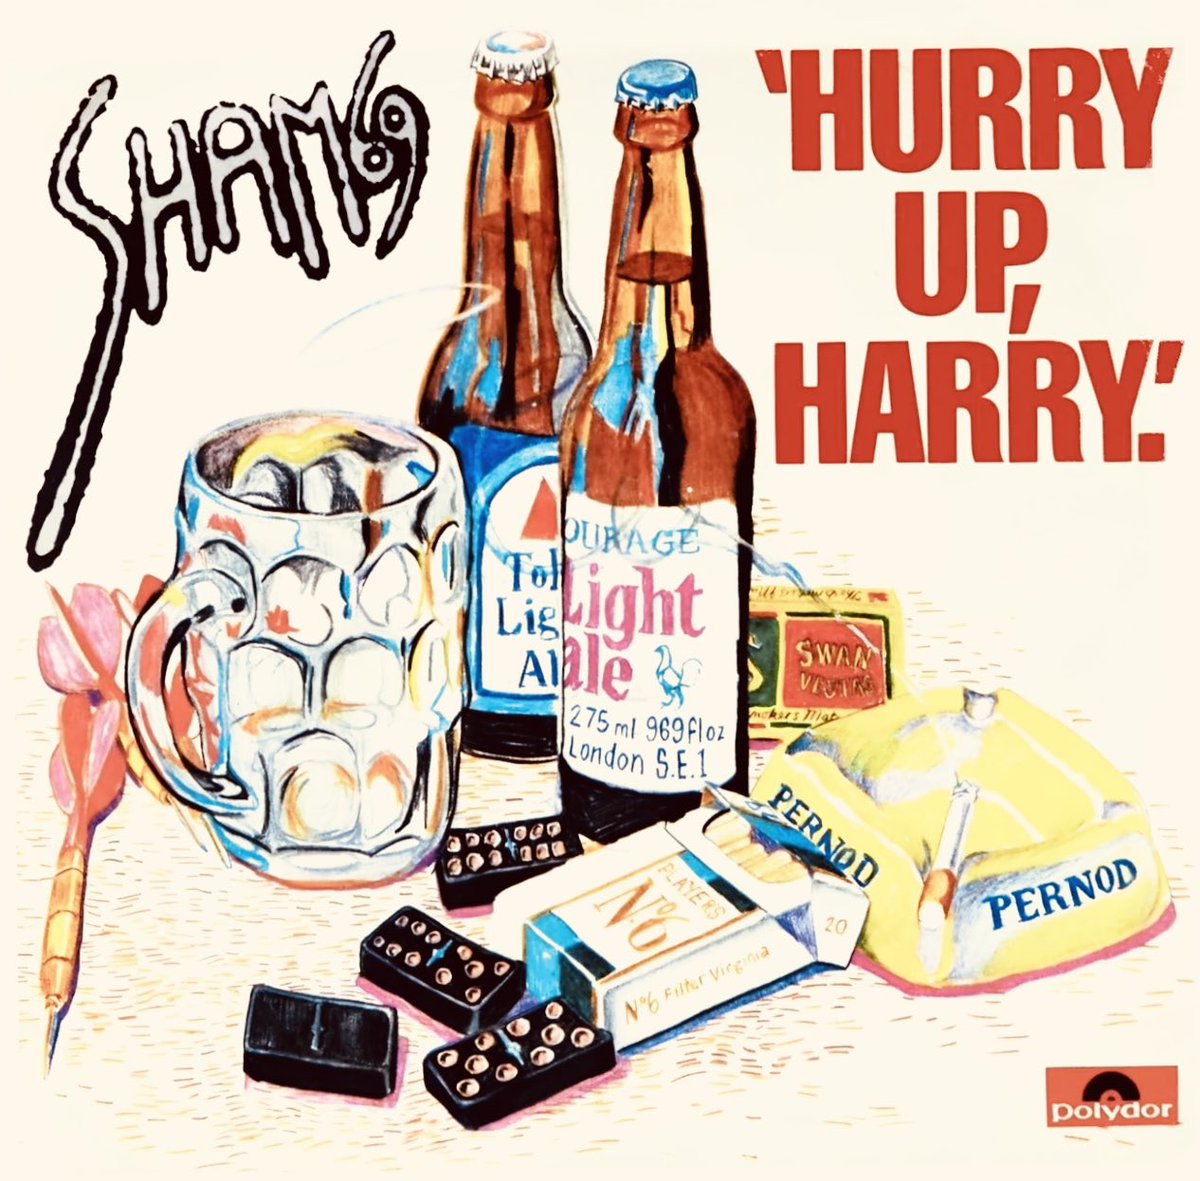 “Come on come on
Hurry up Harry come on”

Sham 69
Hurry Up Harry 

Ⓟ 1978

The times we used to sing this at school, great memories 

@NewWaveAndPunk #sham69 #jimmypursey #punk #punkrock #music #70s #recordcollection #vinylsingle #vinylrecords